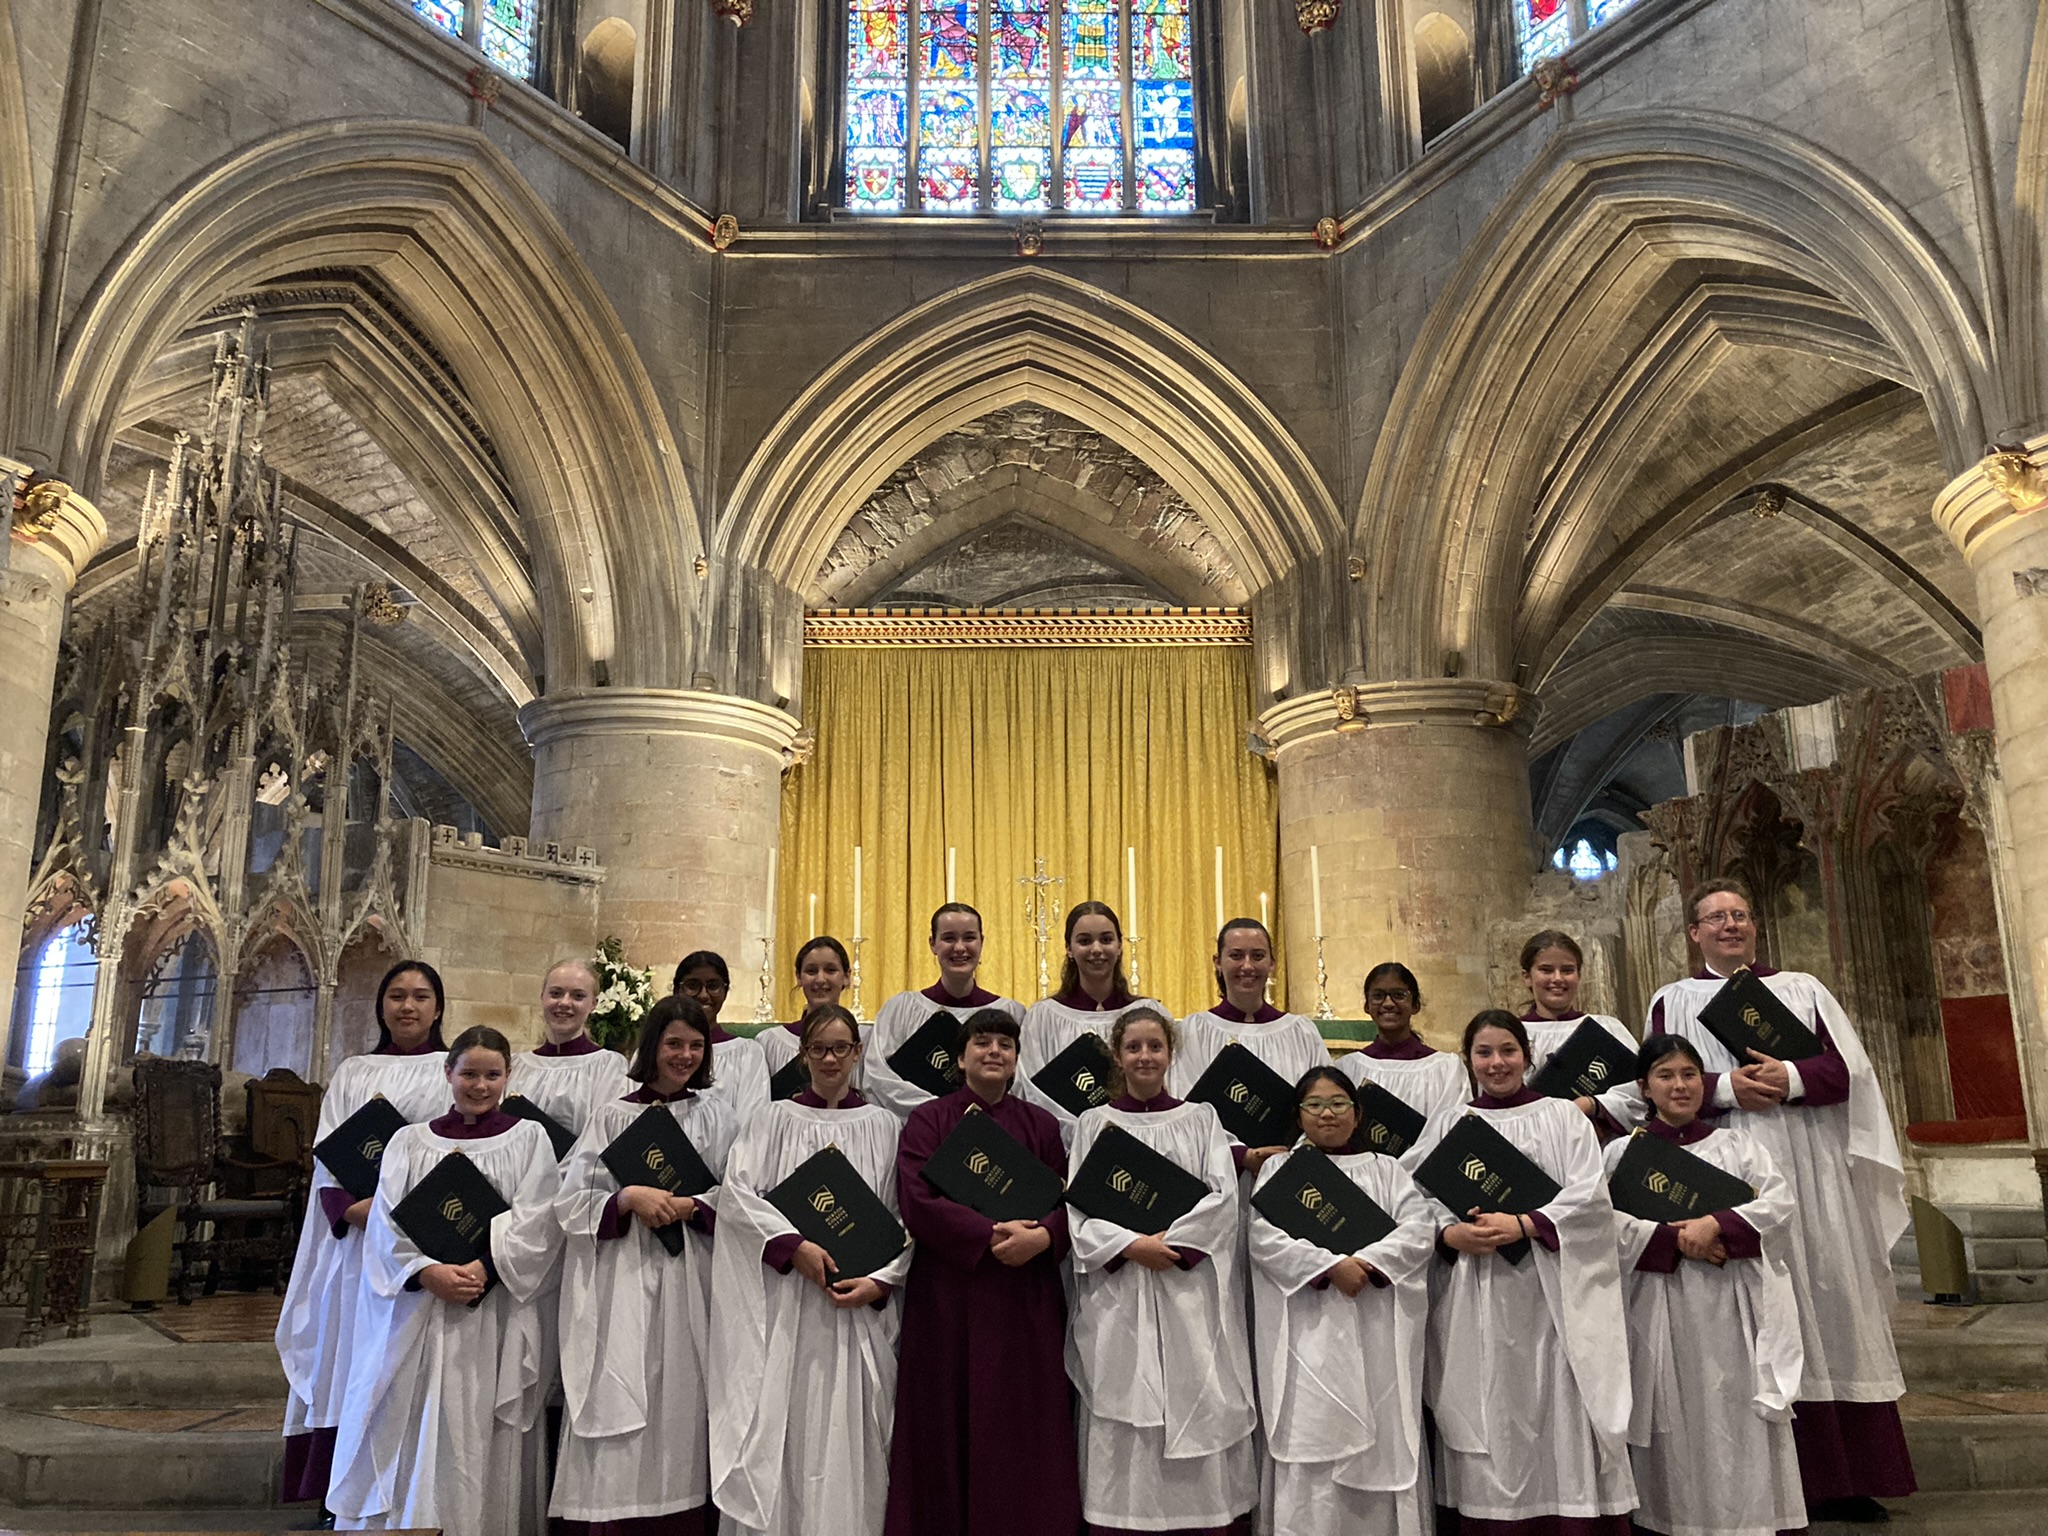 A group of Choristers in burgundy cassocks and white surplices stand in Tewkesbury Abbey holding their black and gold music folders